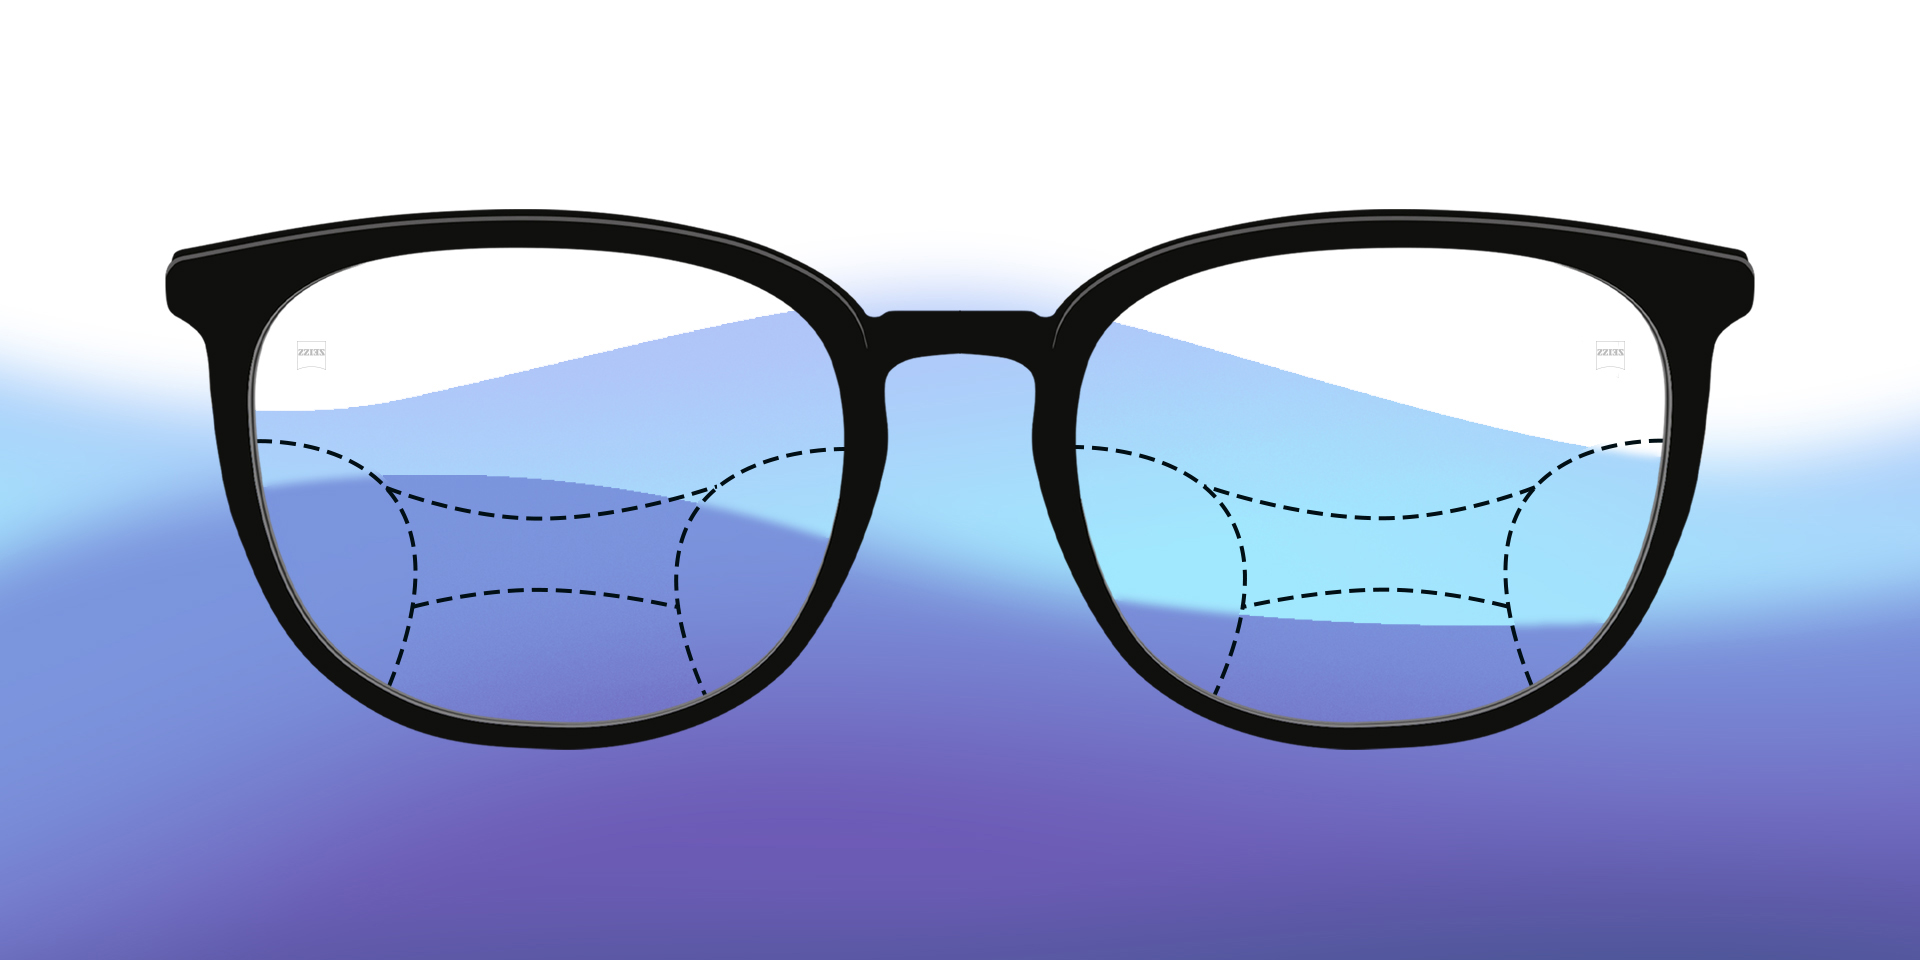 An image of illustrated progressive lenses against a colorful background.